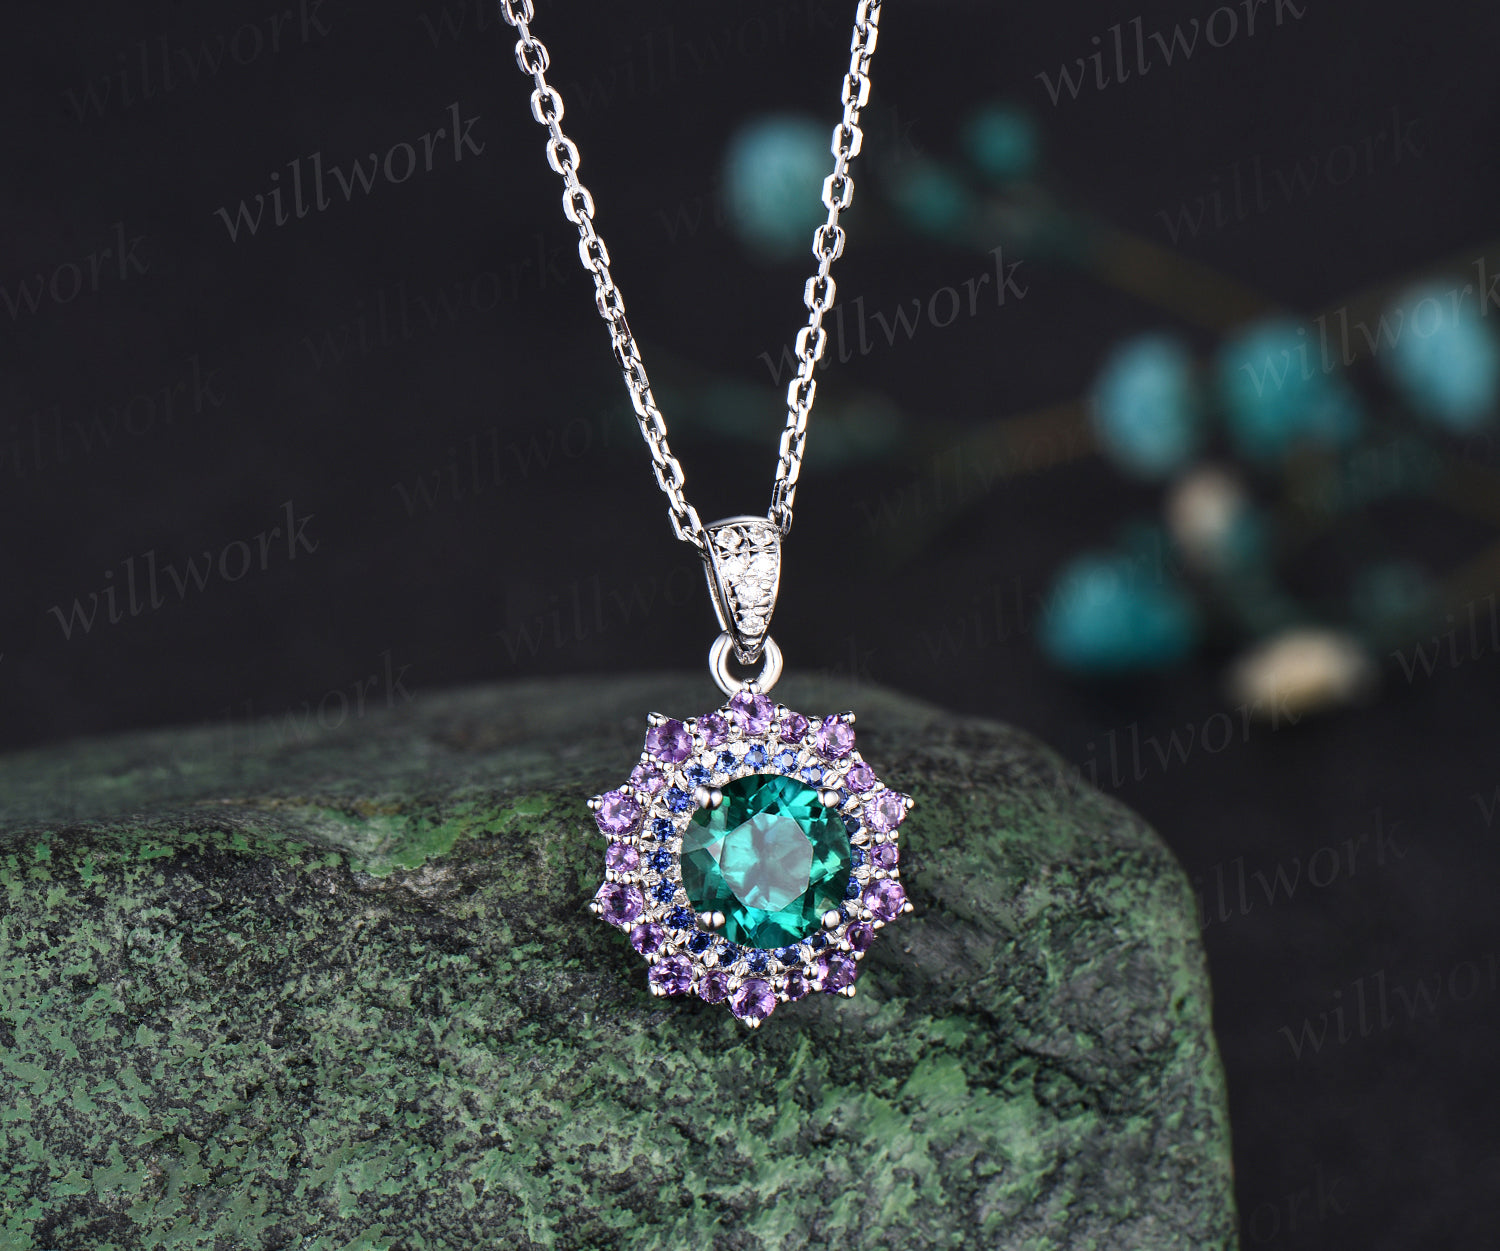 POINTERTECK Simulated Diamond Emerald Necklace for Mom Girlfriend Gifts,  Sterling Silver Amethyst Aquamarine Necklace with 18 Inch Silver Chain,  Purple - Walmart.com